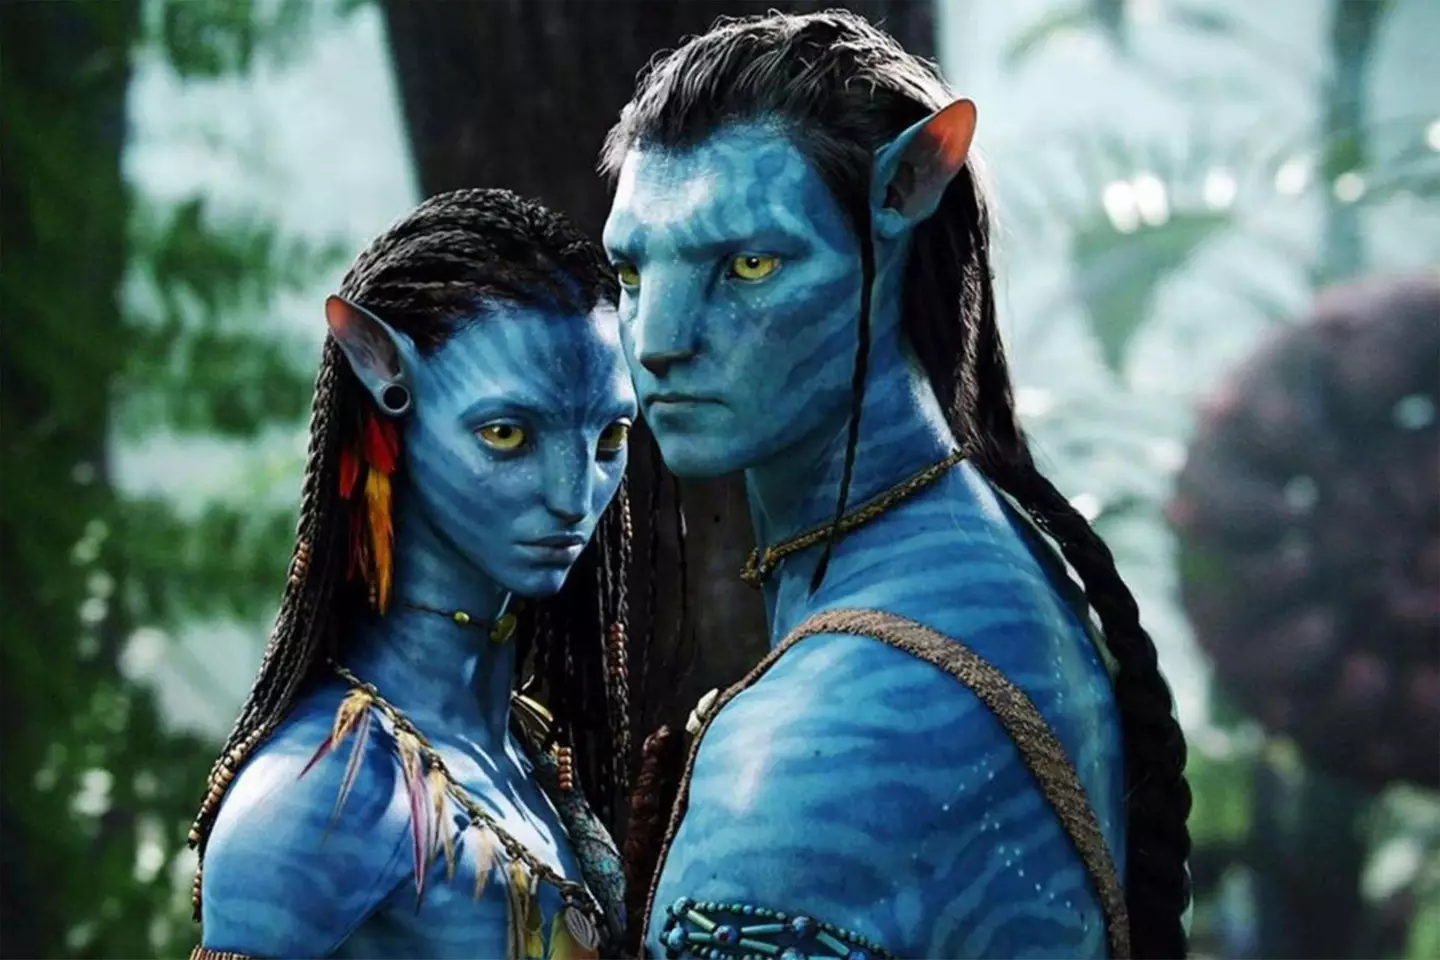 The original Avatar movie was a box office hit, the sequels might not be.